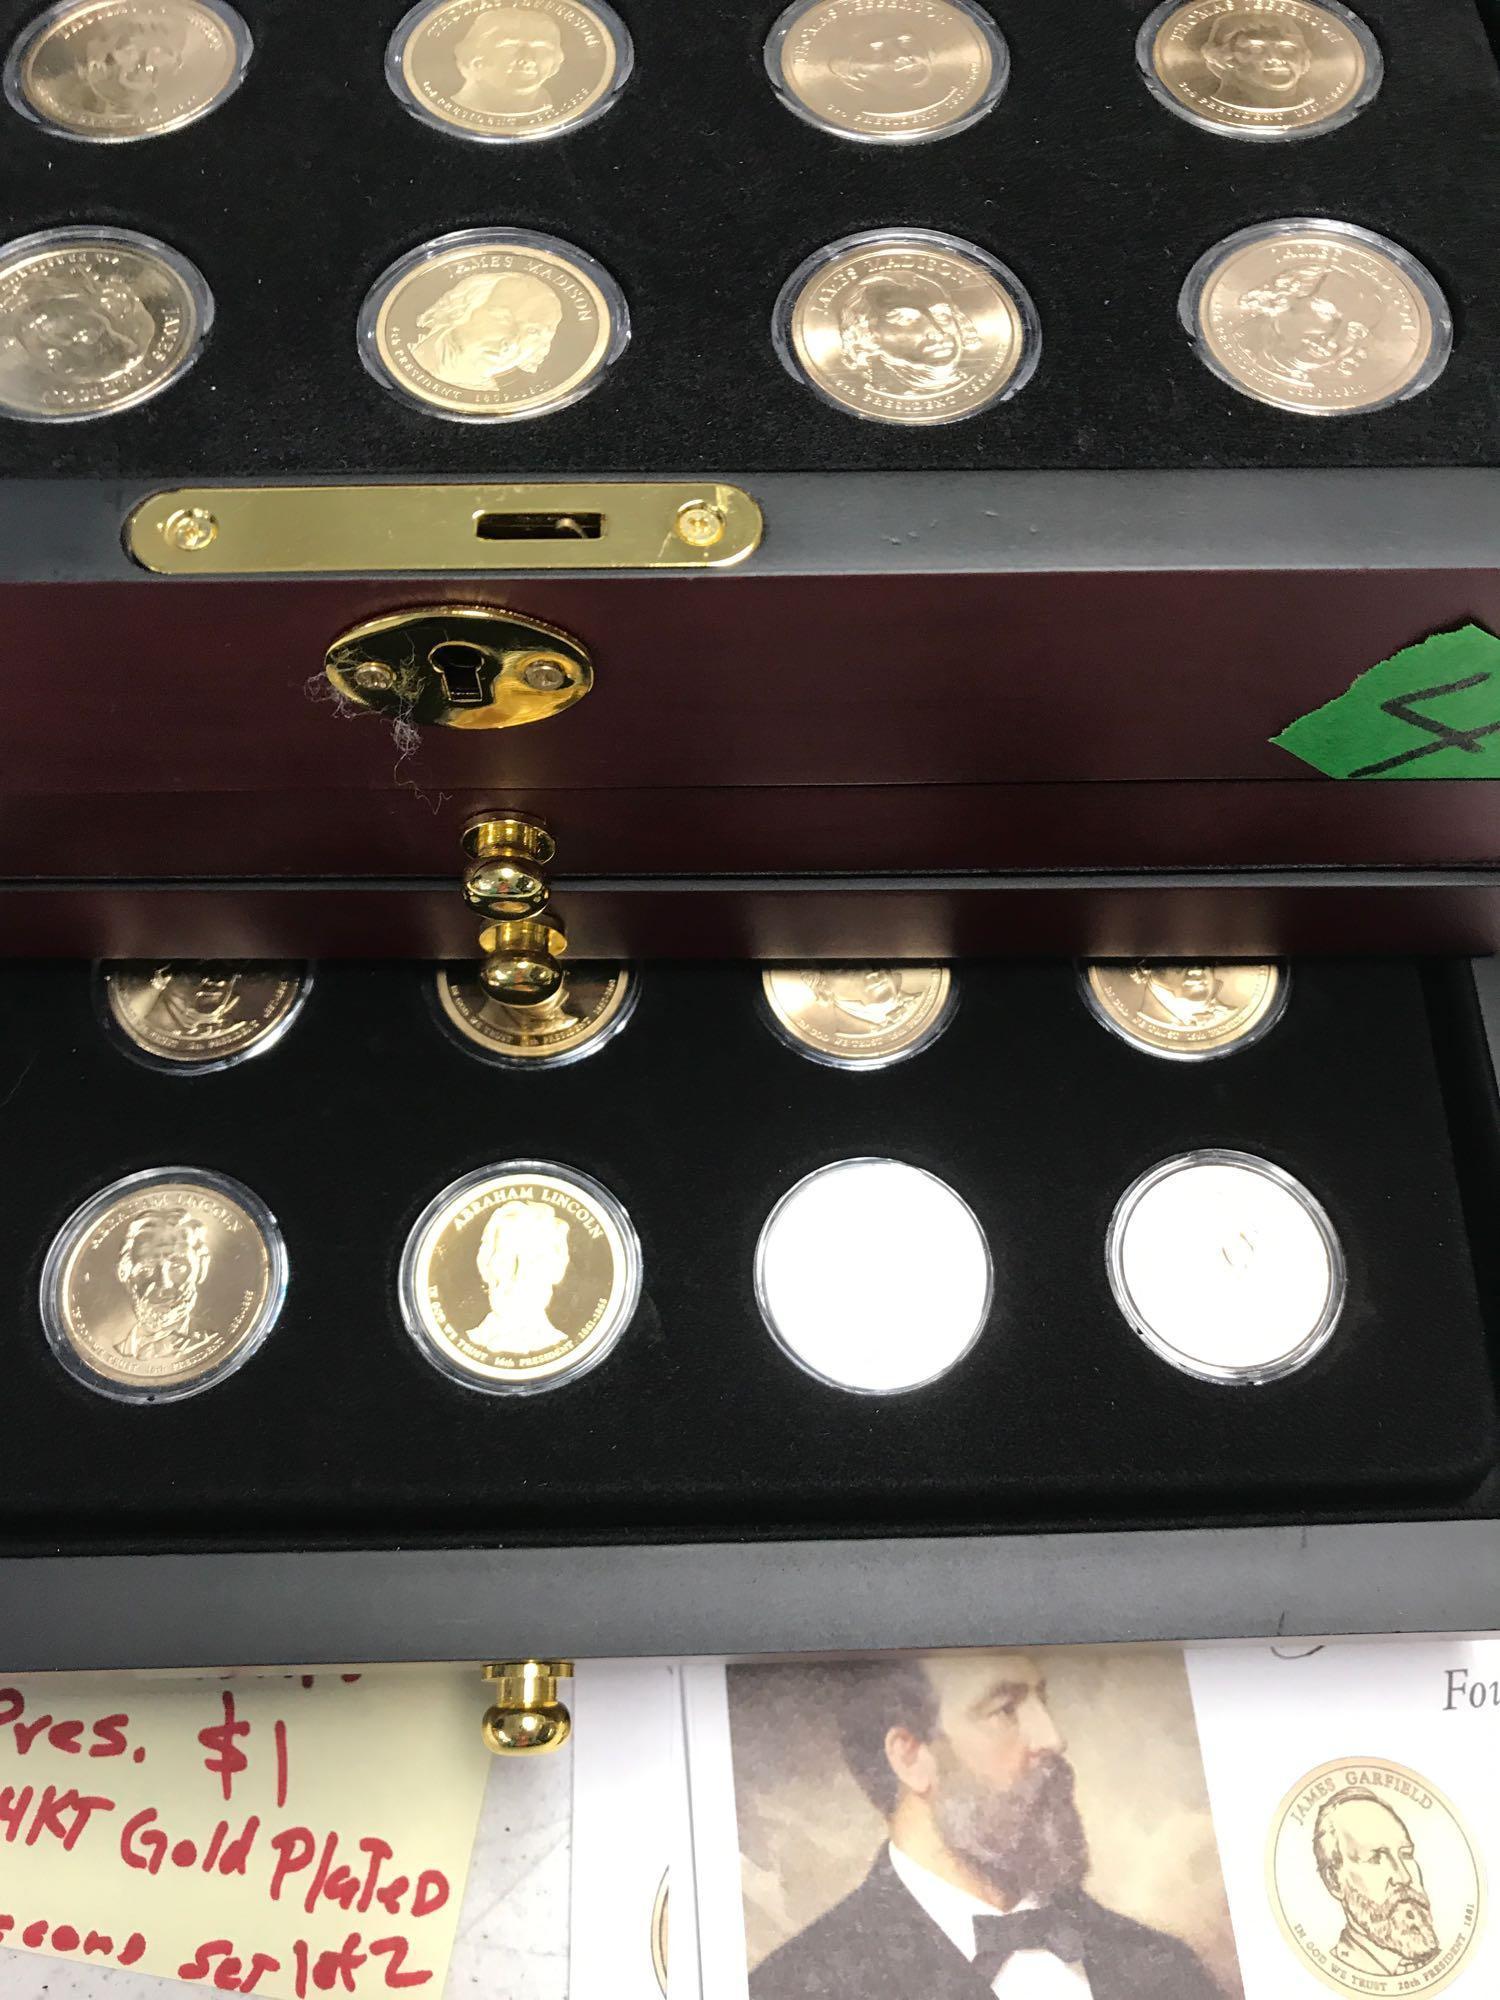 Ultimate presidential dollar collection 2007-2011 100 dollar coins United States mint starter set